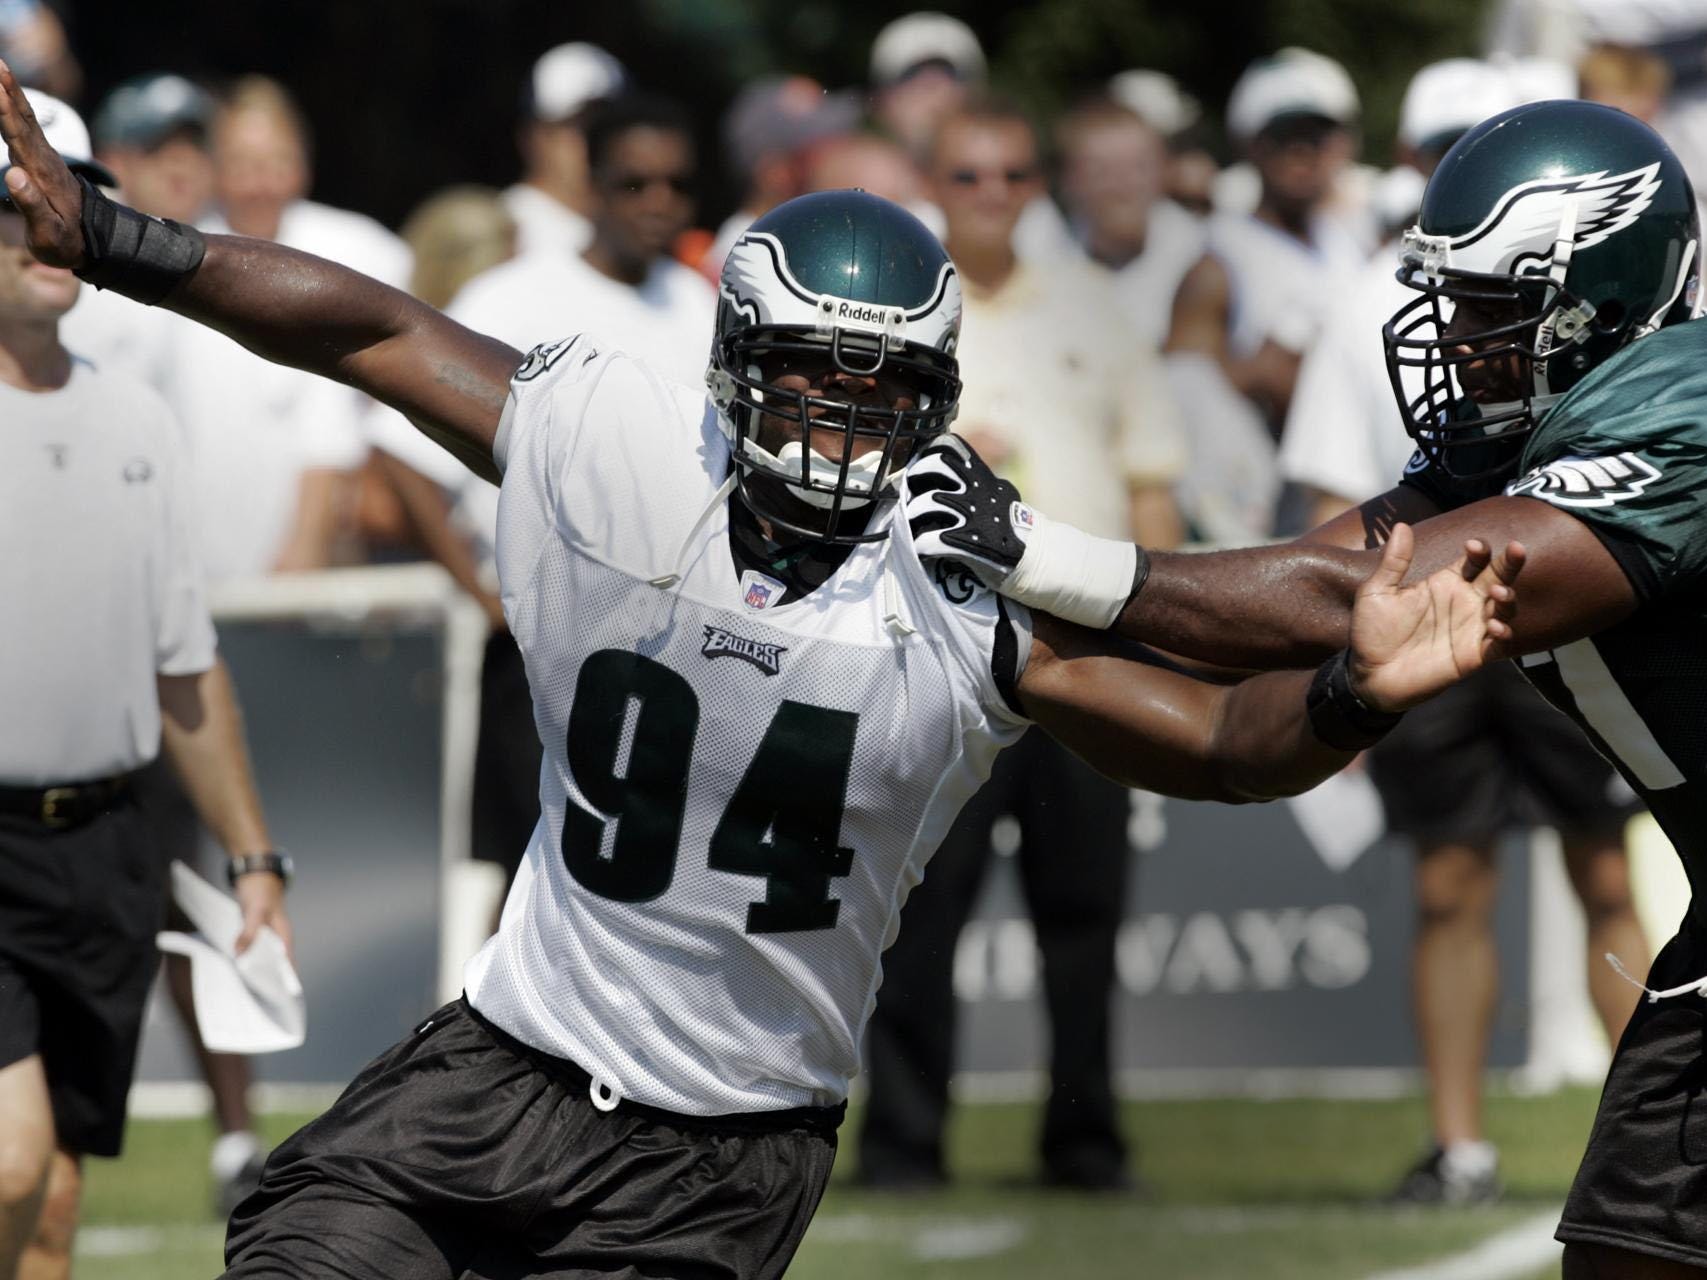 Philadelphia Eagles defensive lineman N.D. Kalu, left, runs by offensive lineman Artis Hicks during the afternoon session of training camp in Bethlehem, Pa., Wednesday, Aug. 3, 2005. (AP Photo/Coke Whitworth)